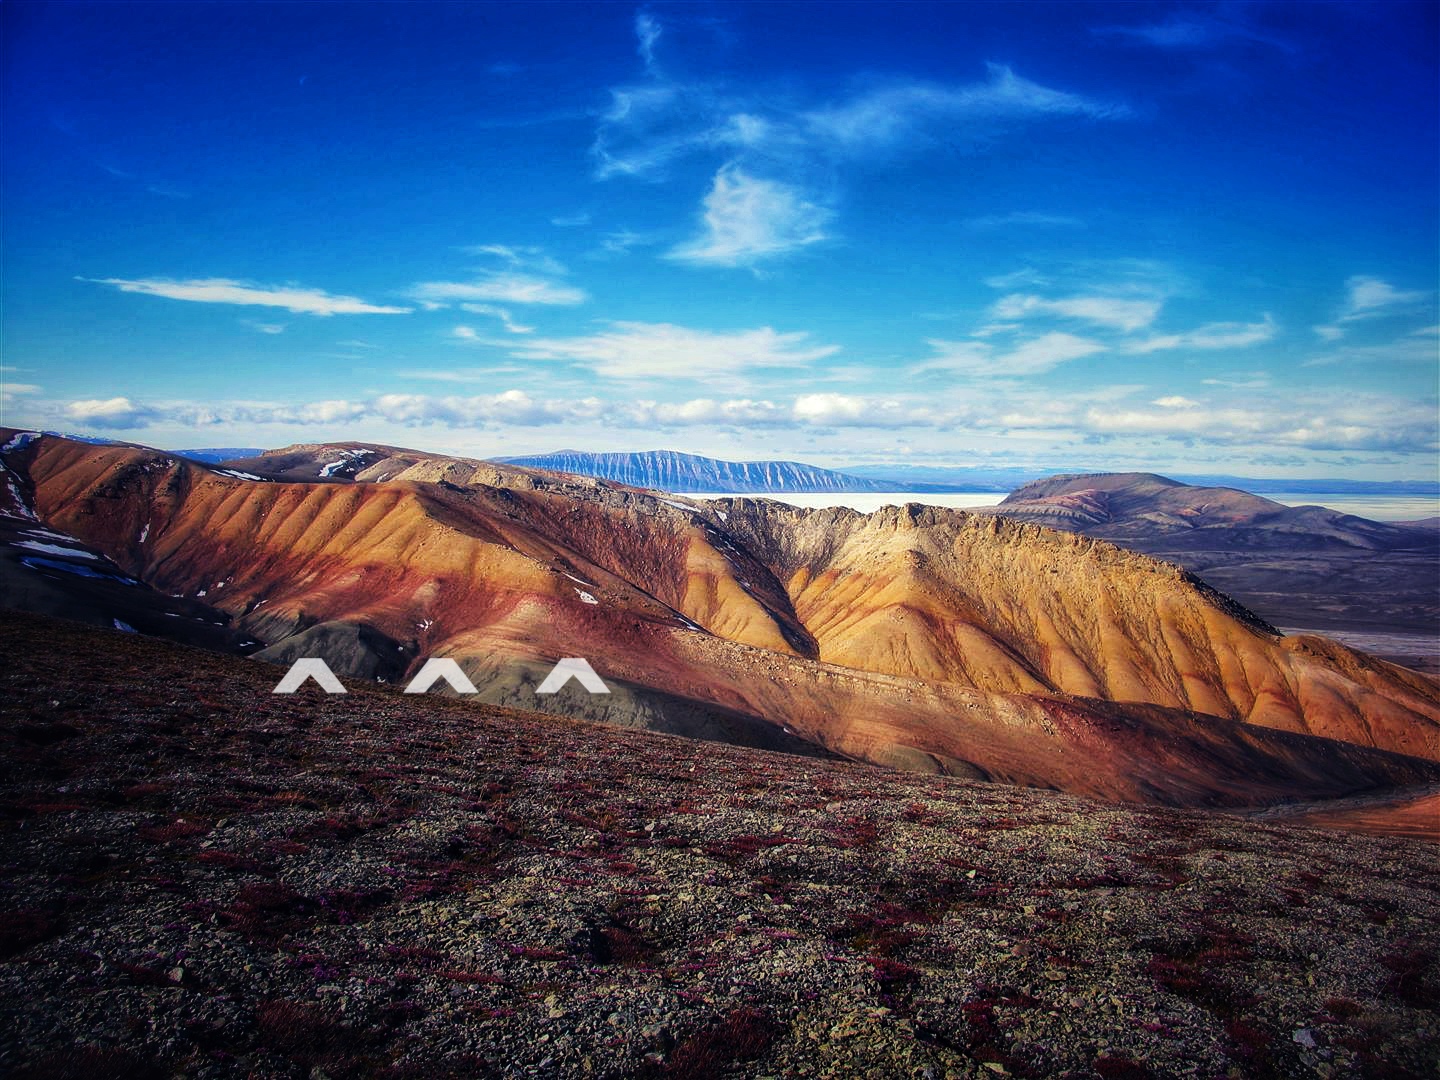 The change from green to red rock on northern Ellesmere Island marks the time when 90 percent of life was lost during the Permian Extinction. A large spike in mercury content was found here.